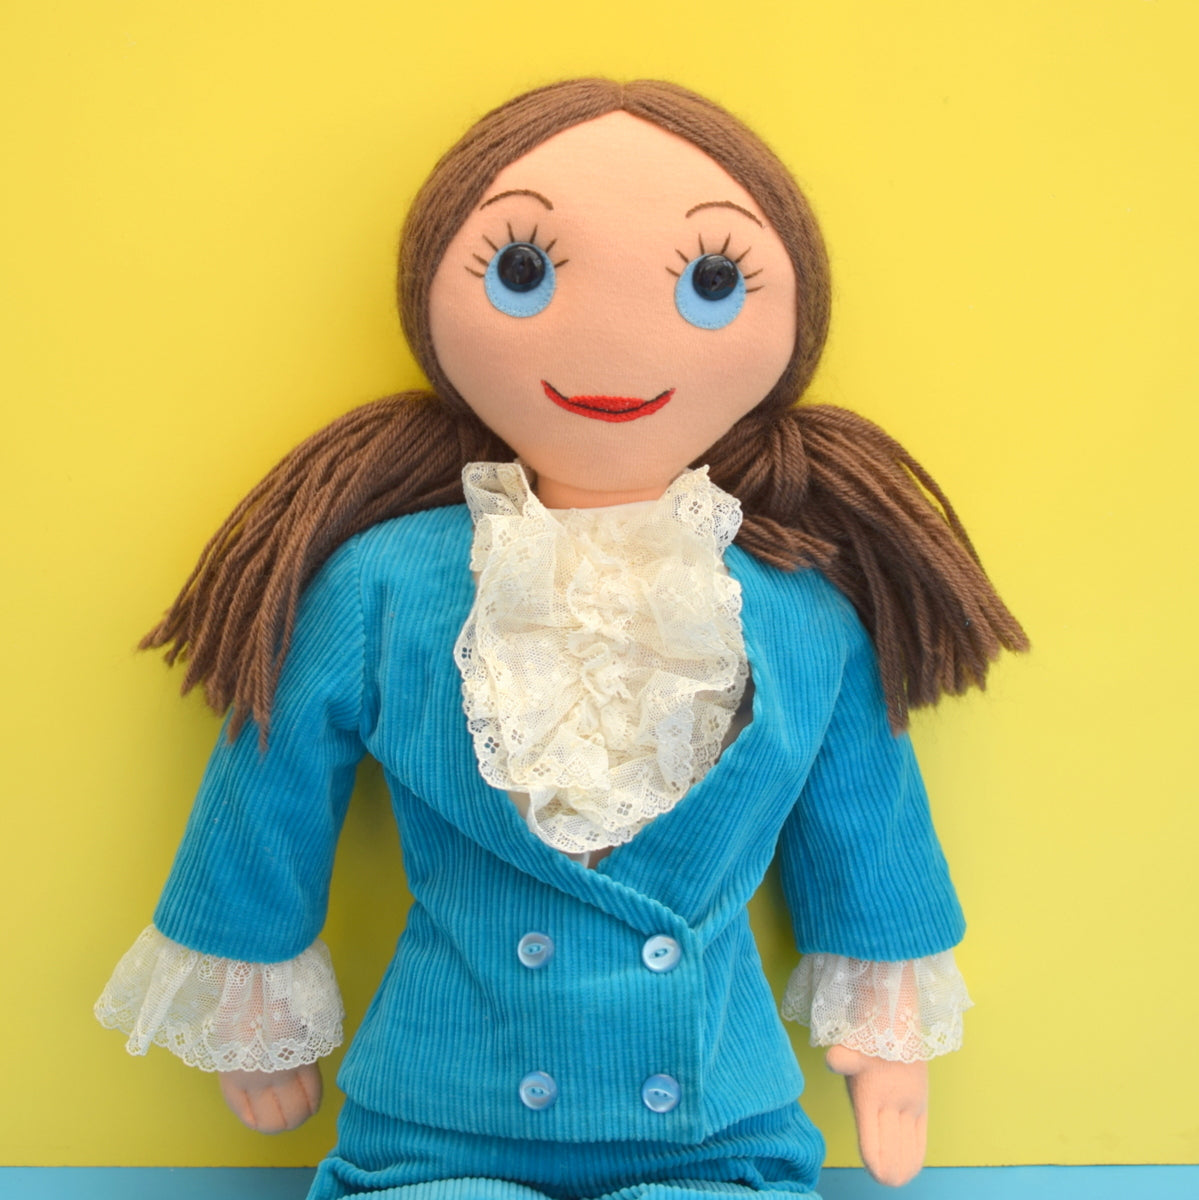 Vintage 1970s Large Fabric Doll In Turquoise Suit - Austin Powers Style